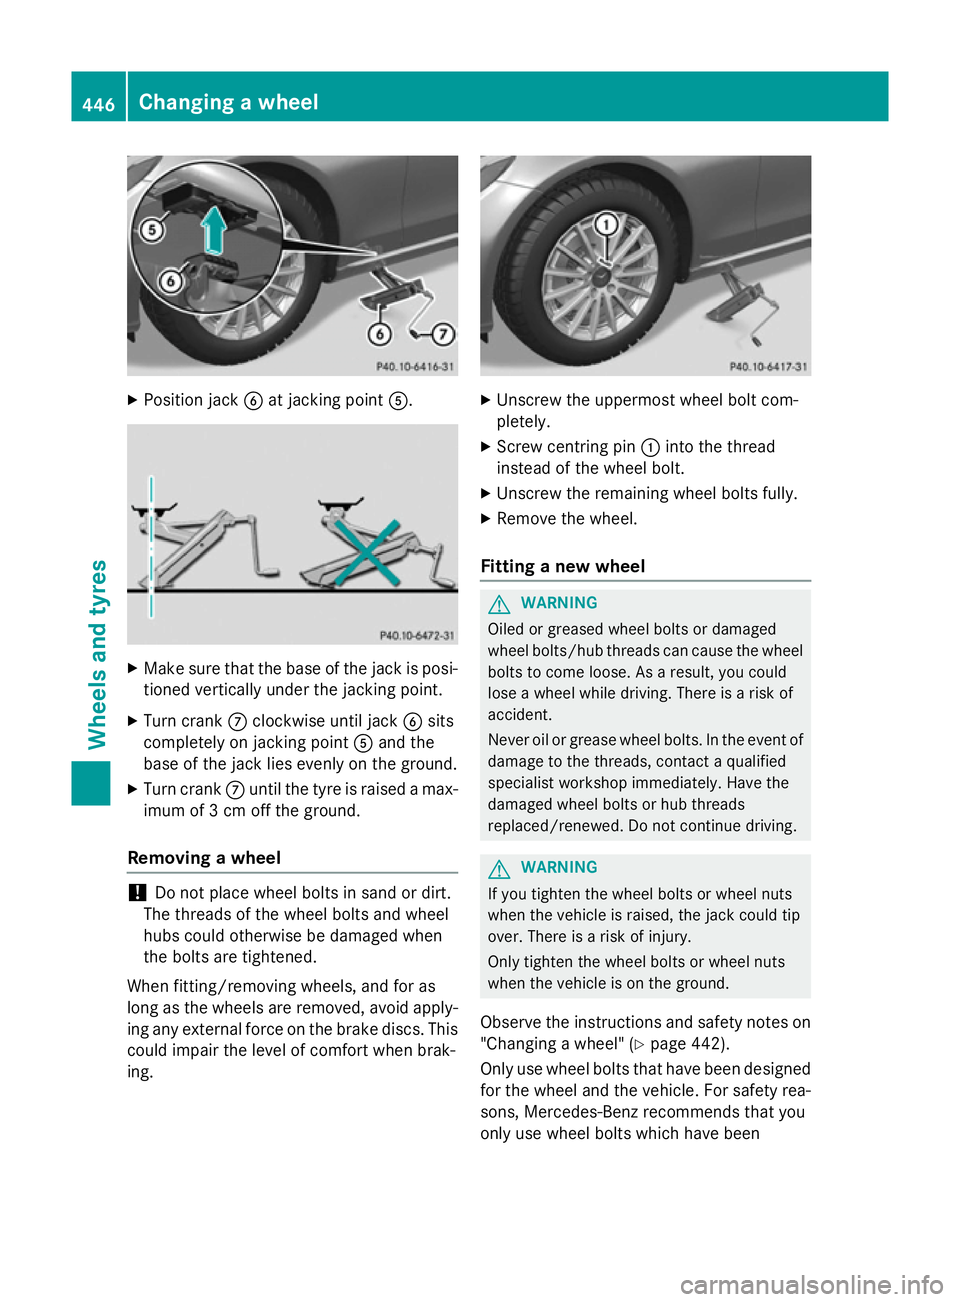 MERCEDES-BENZ C-CLASS ESTATE 2014  Owners Manual X
Position jack Bat jacking point A. X
Make sure that the base of the jack is posi-
tioned vertically under the jacking point.
X Turn crank Cclockwise until jack Bsits
completely on jacking point Aand